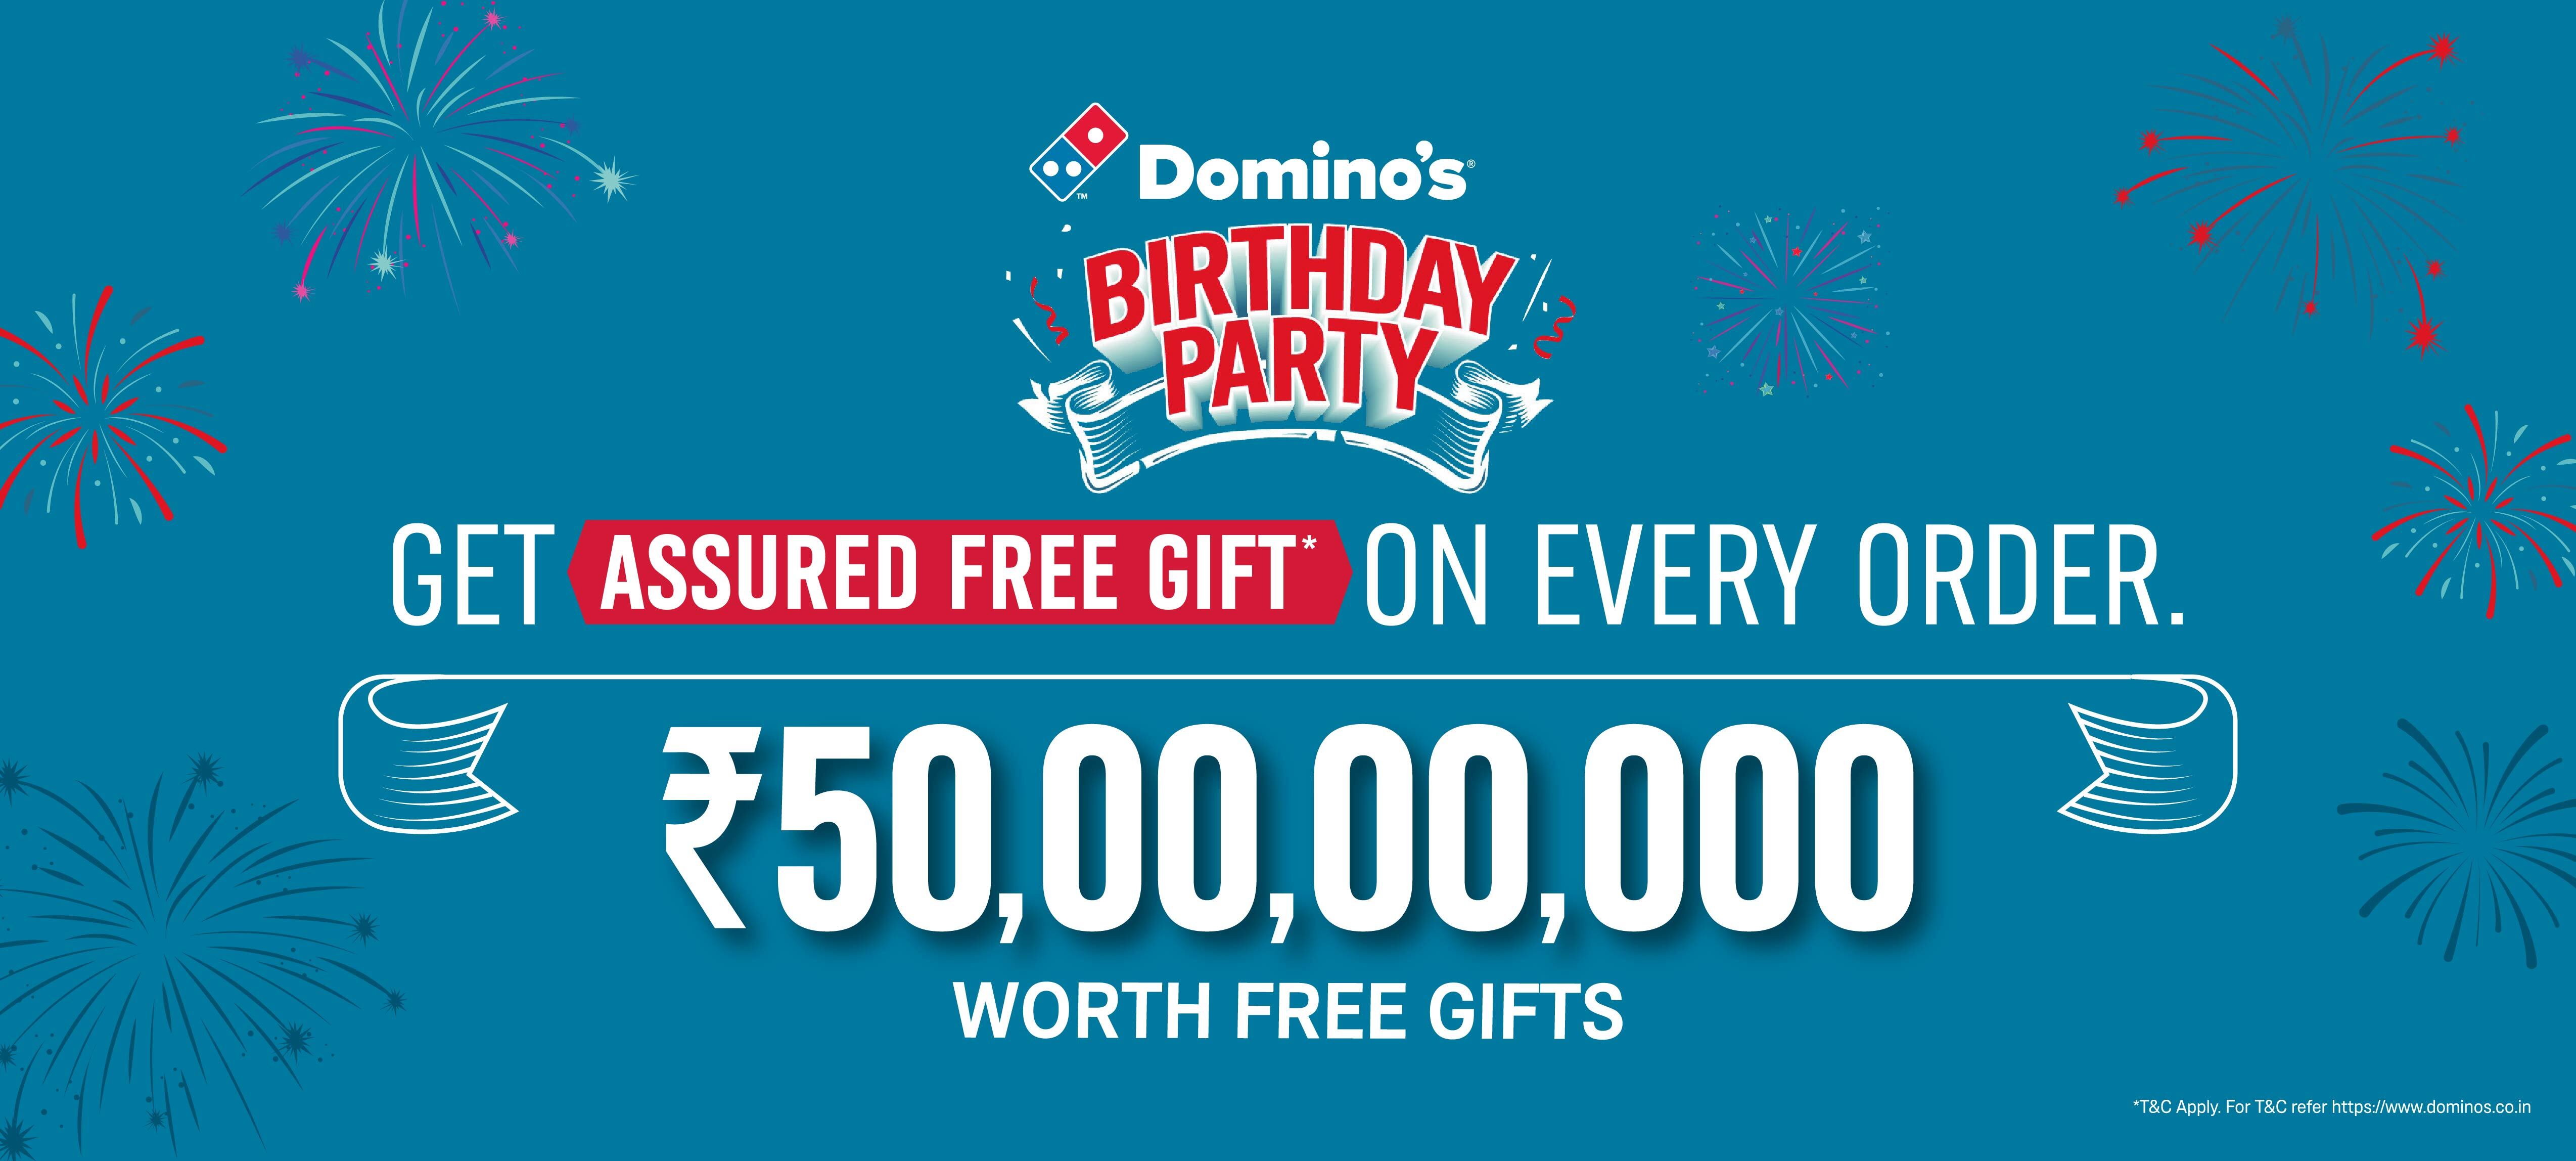 Join the #DominosBirthdayParty and get a SURPRISE FREE GIFT with every order.